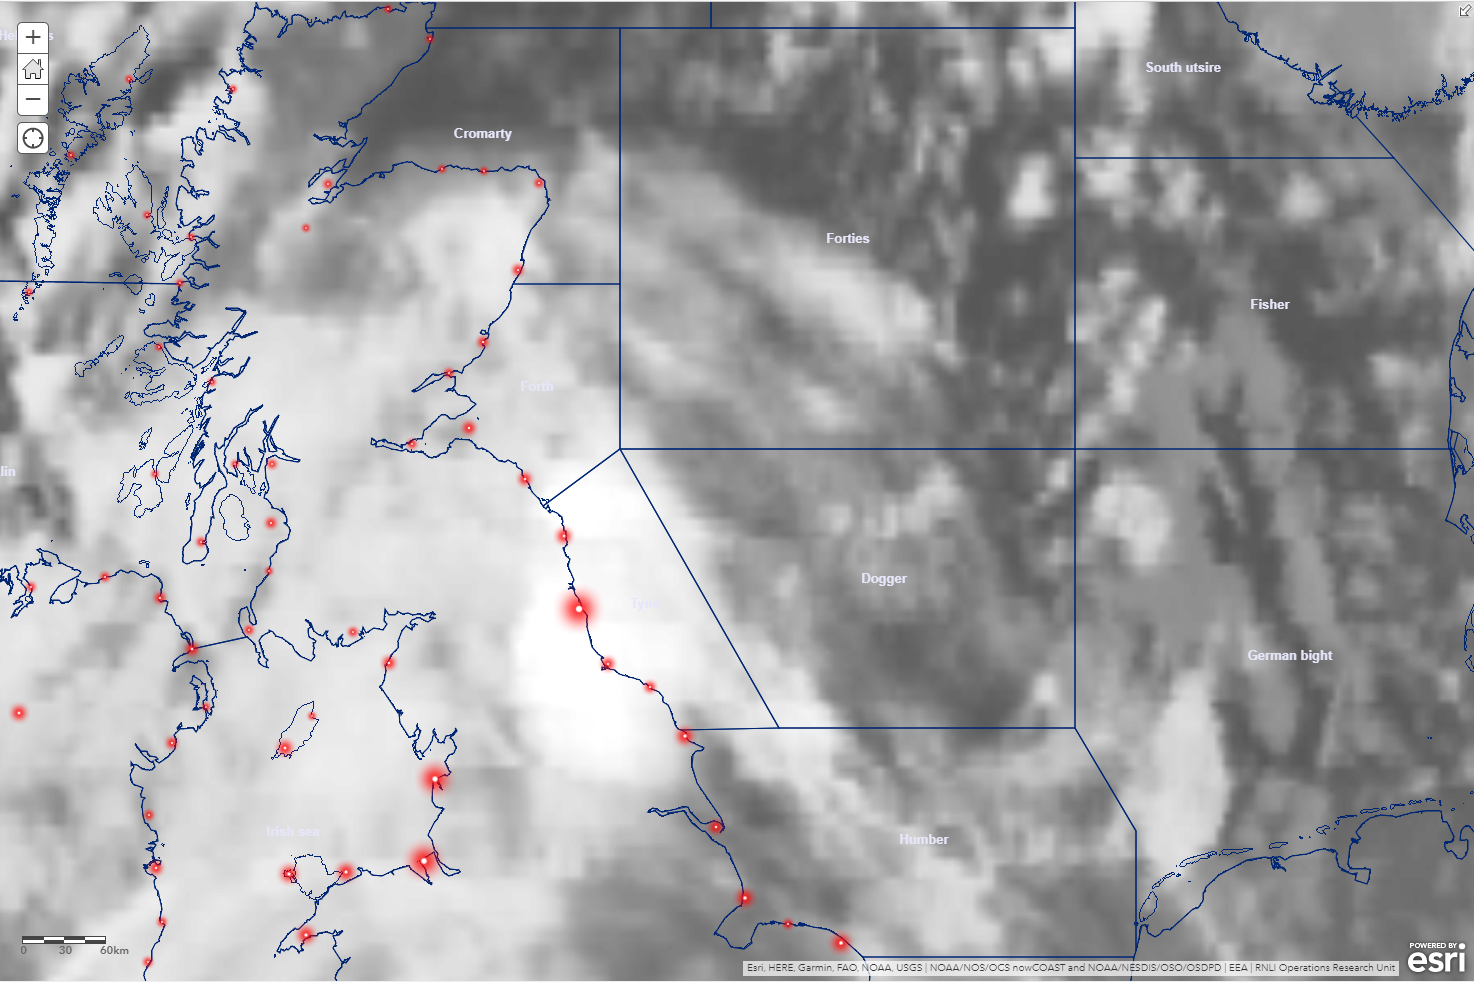 Shipping Forecast with GOES weather imagery and RNLI Lifeboat Stations